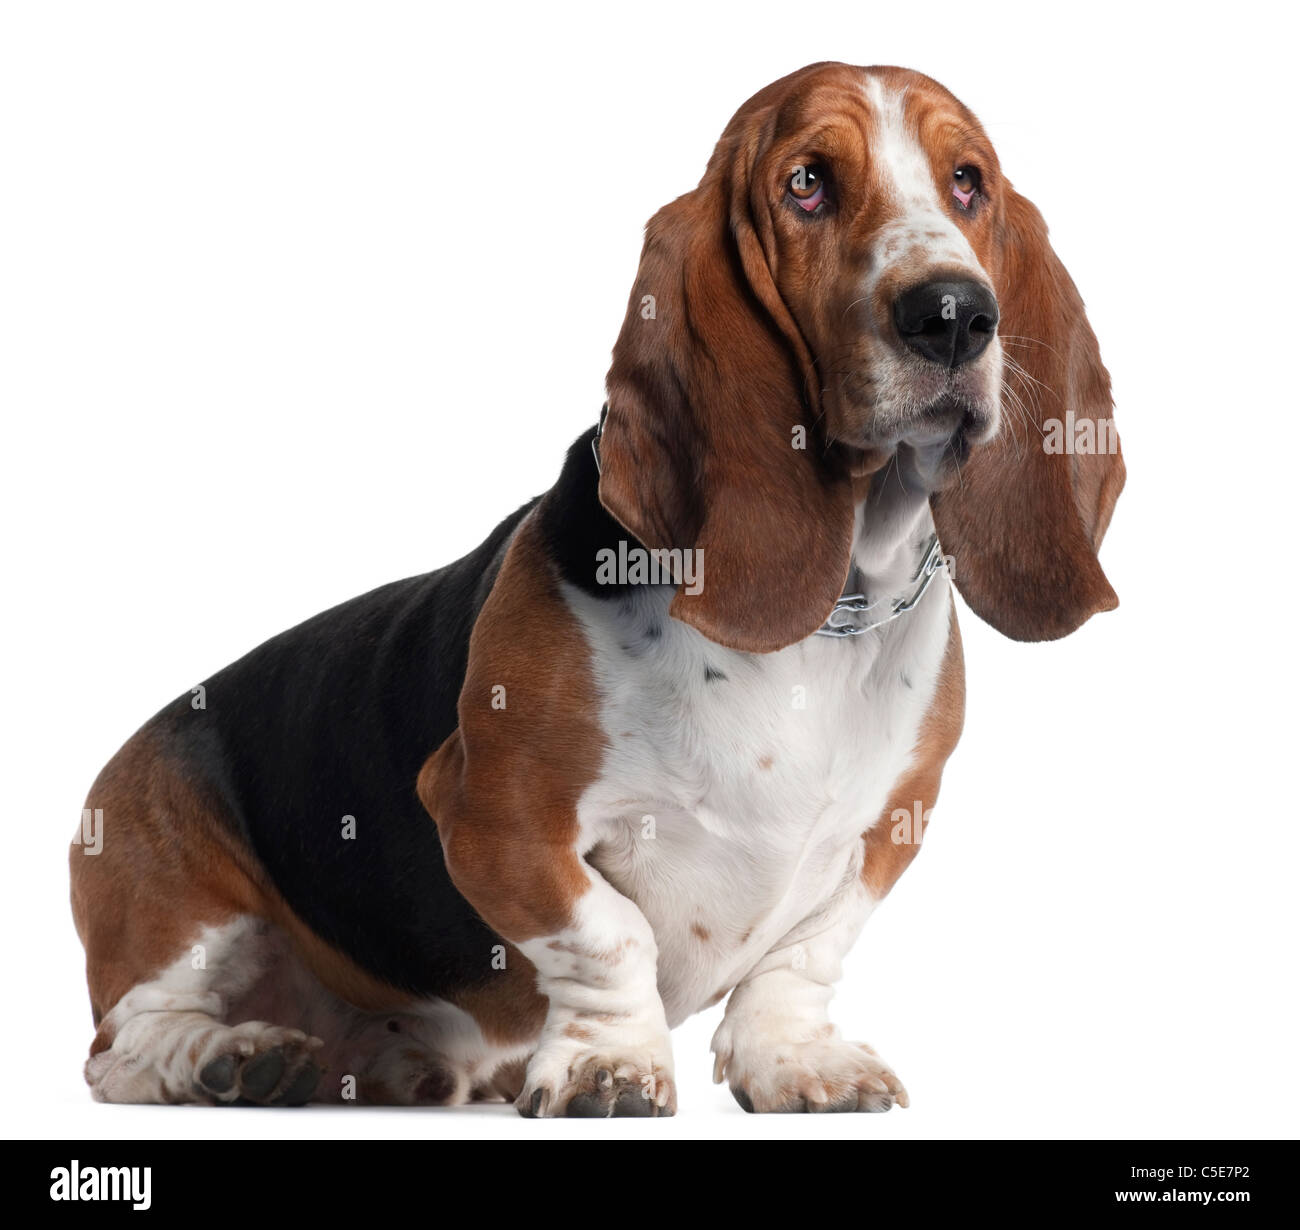 Basset Hound, 3 years old, sitting in front of white background Stock Photo